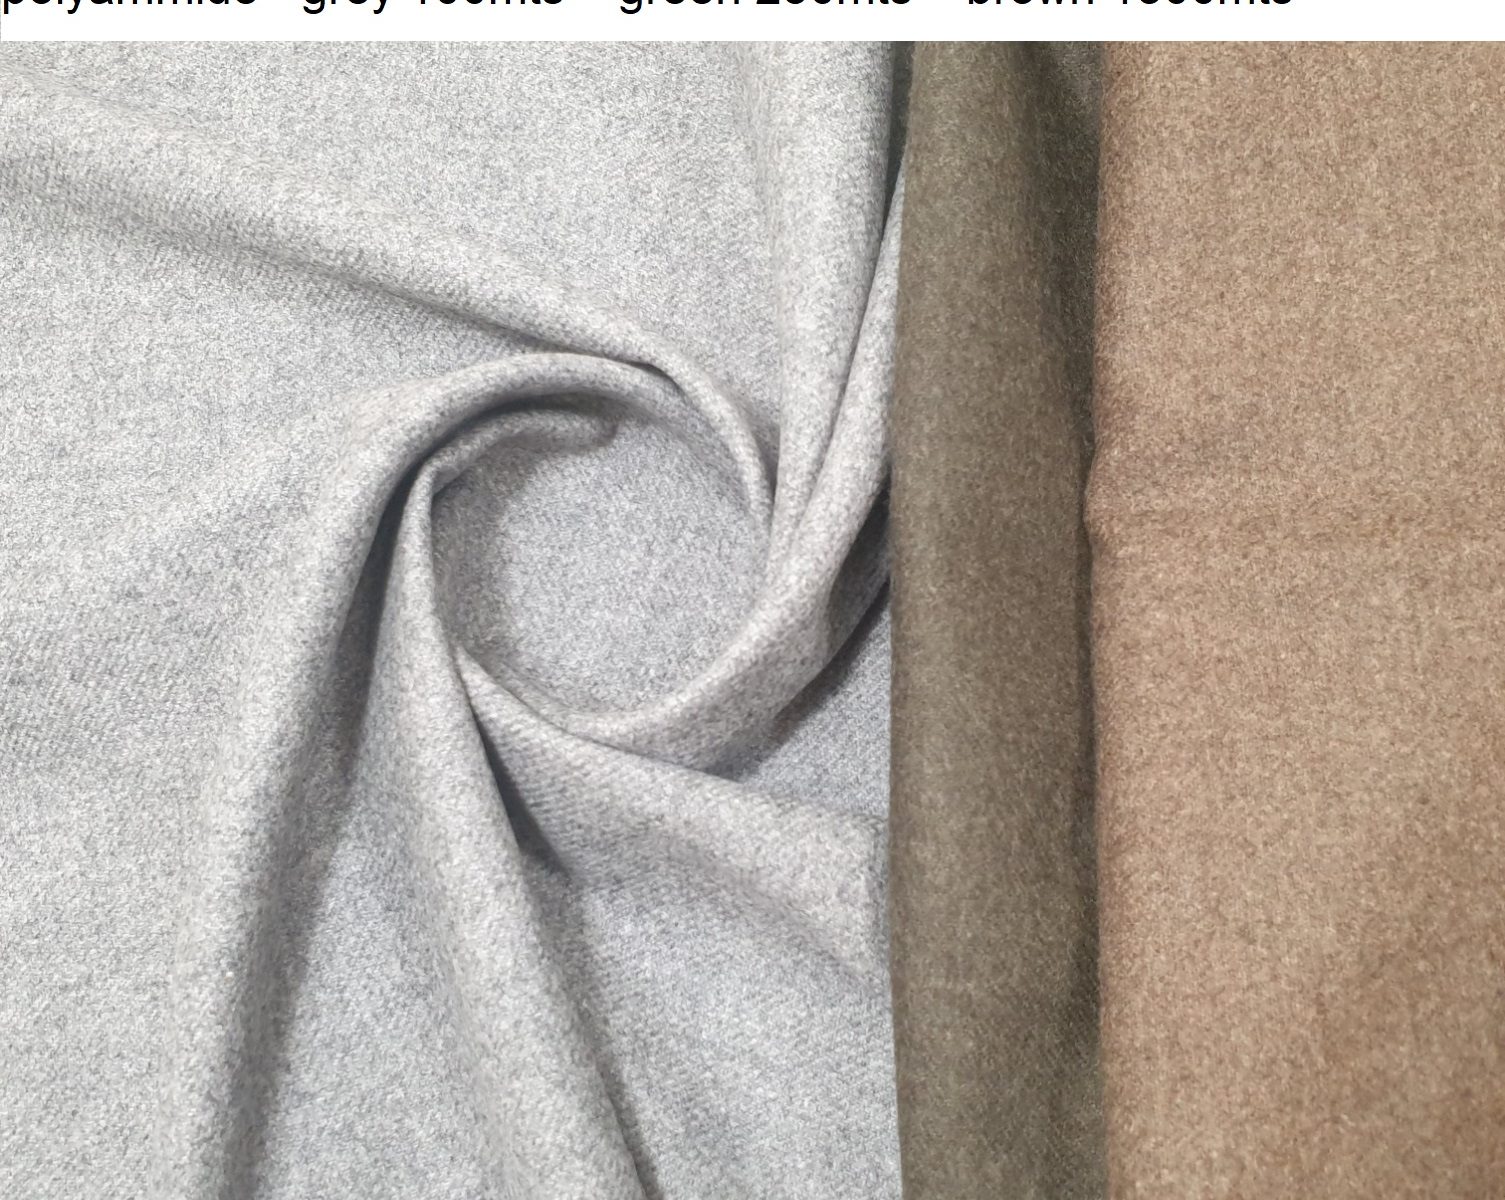 7763 wool blend flannel jacket and coat fabric WIDTH cm155 WEIGHT gr400 - gr258 square meter - COMPOSITION 62 wool 38 polyammide - grey 100mts – green 250mts – brown 1300mts